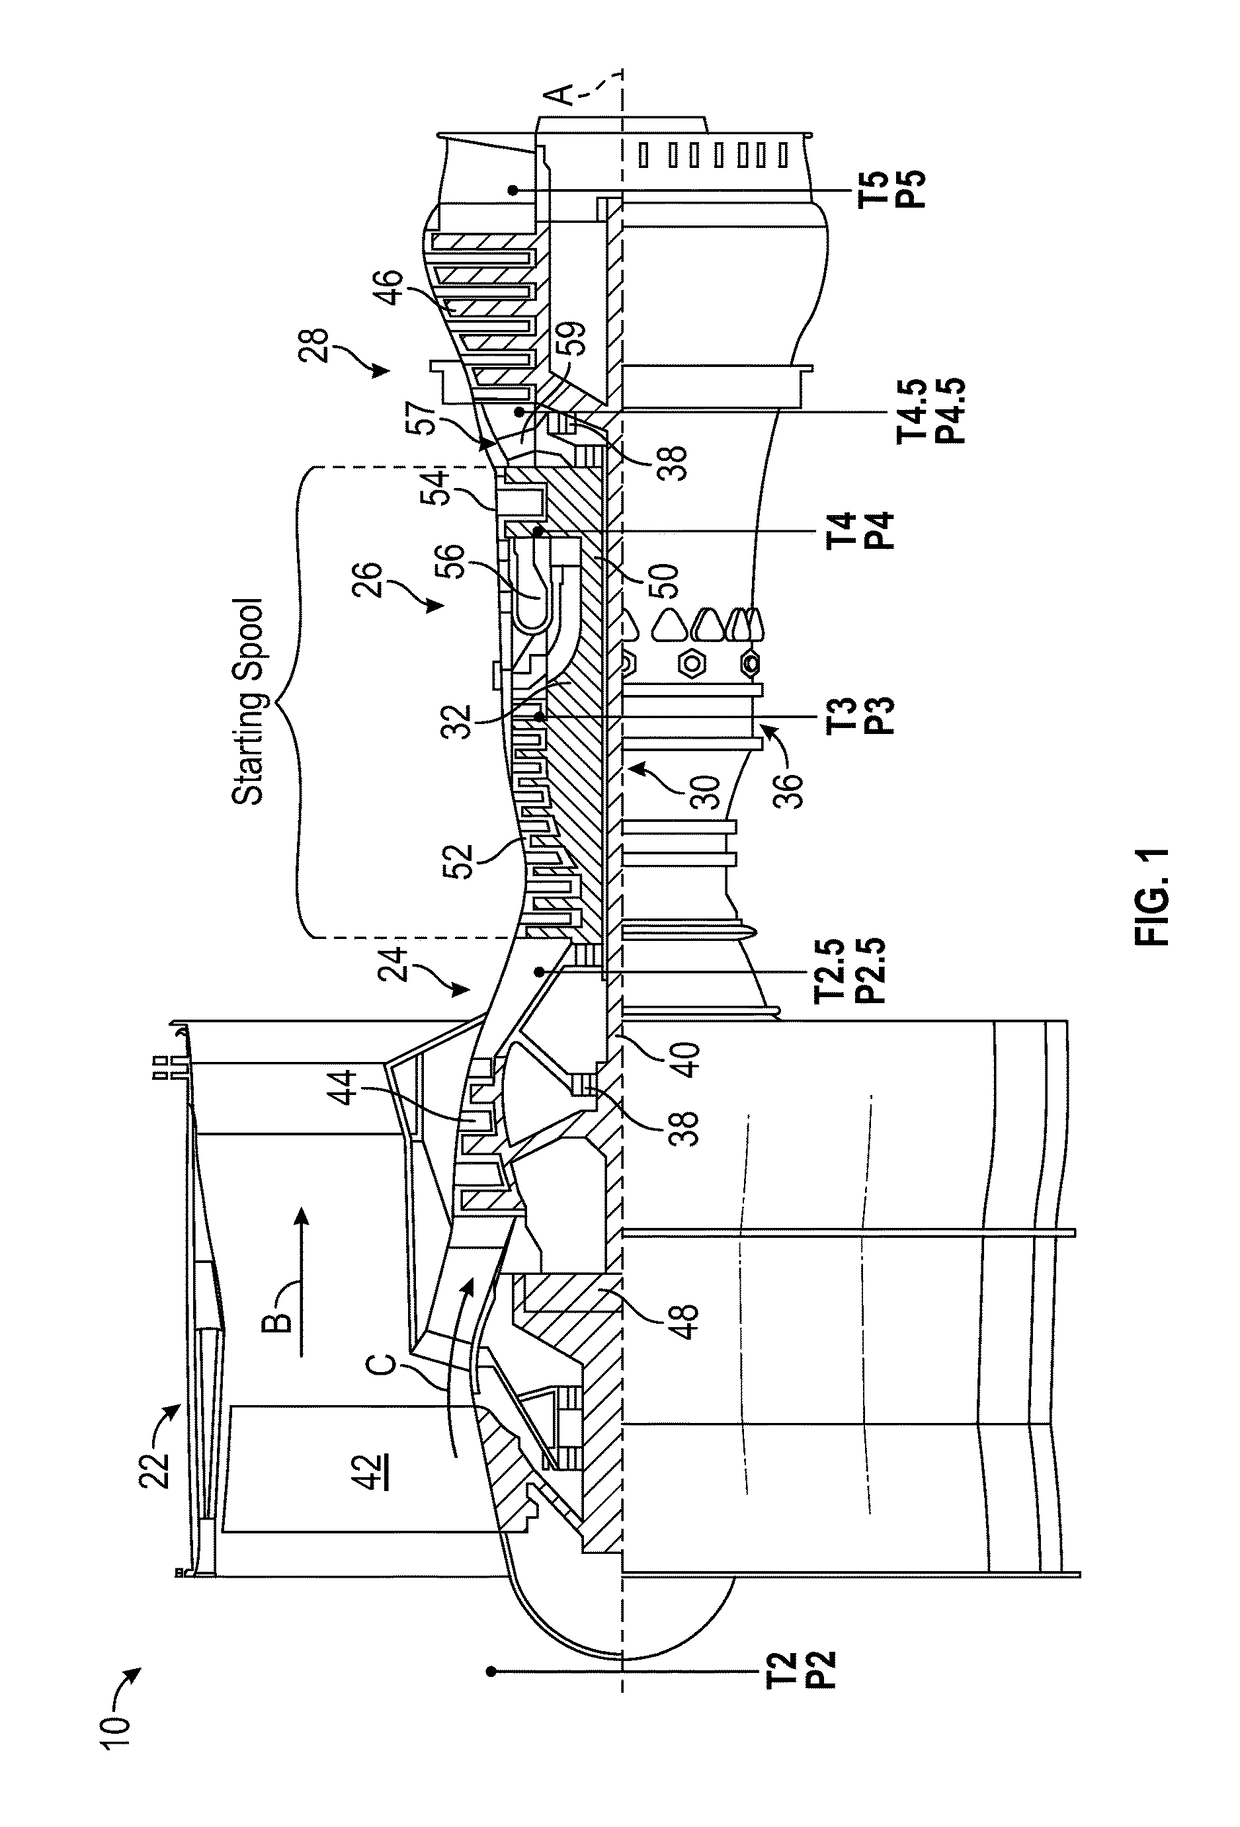 Bowed rotor start mitigation in a gas turbine engine using aircraft-derived parameters